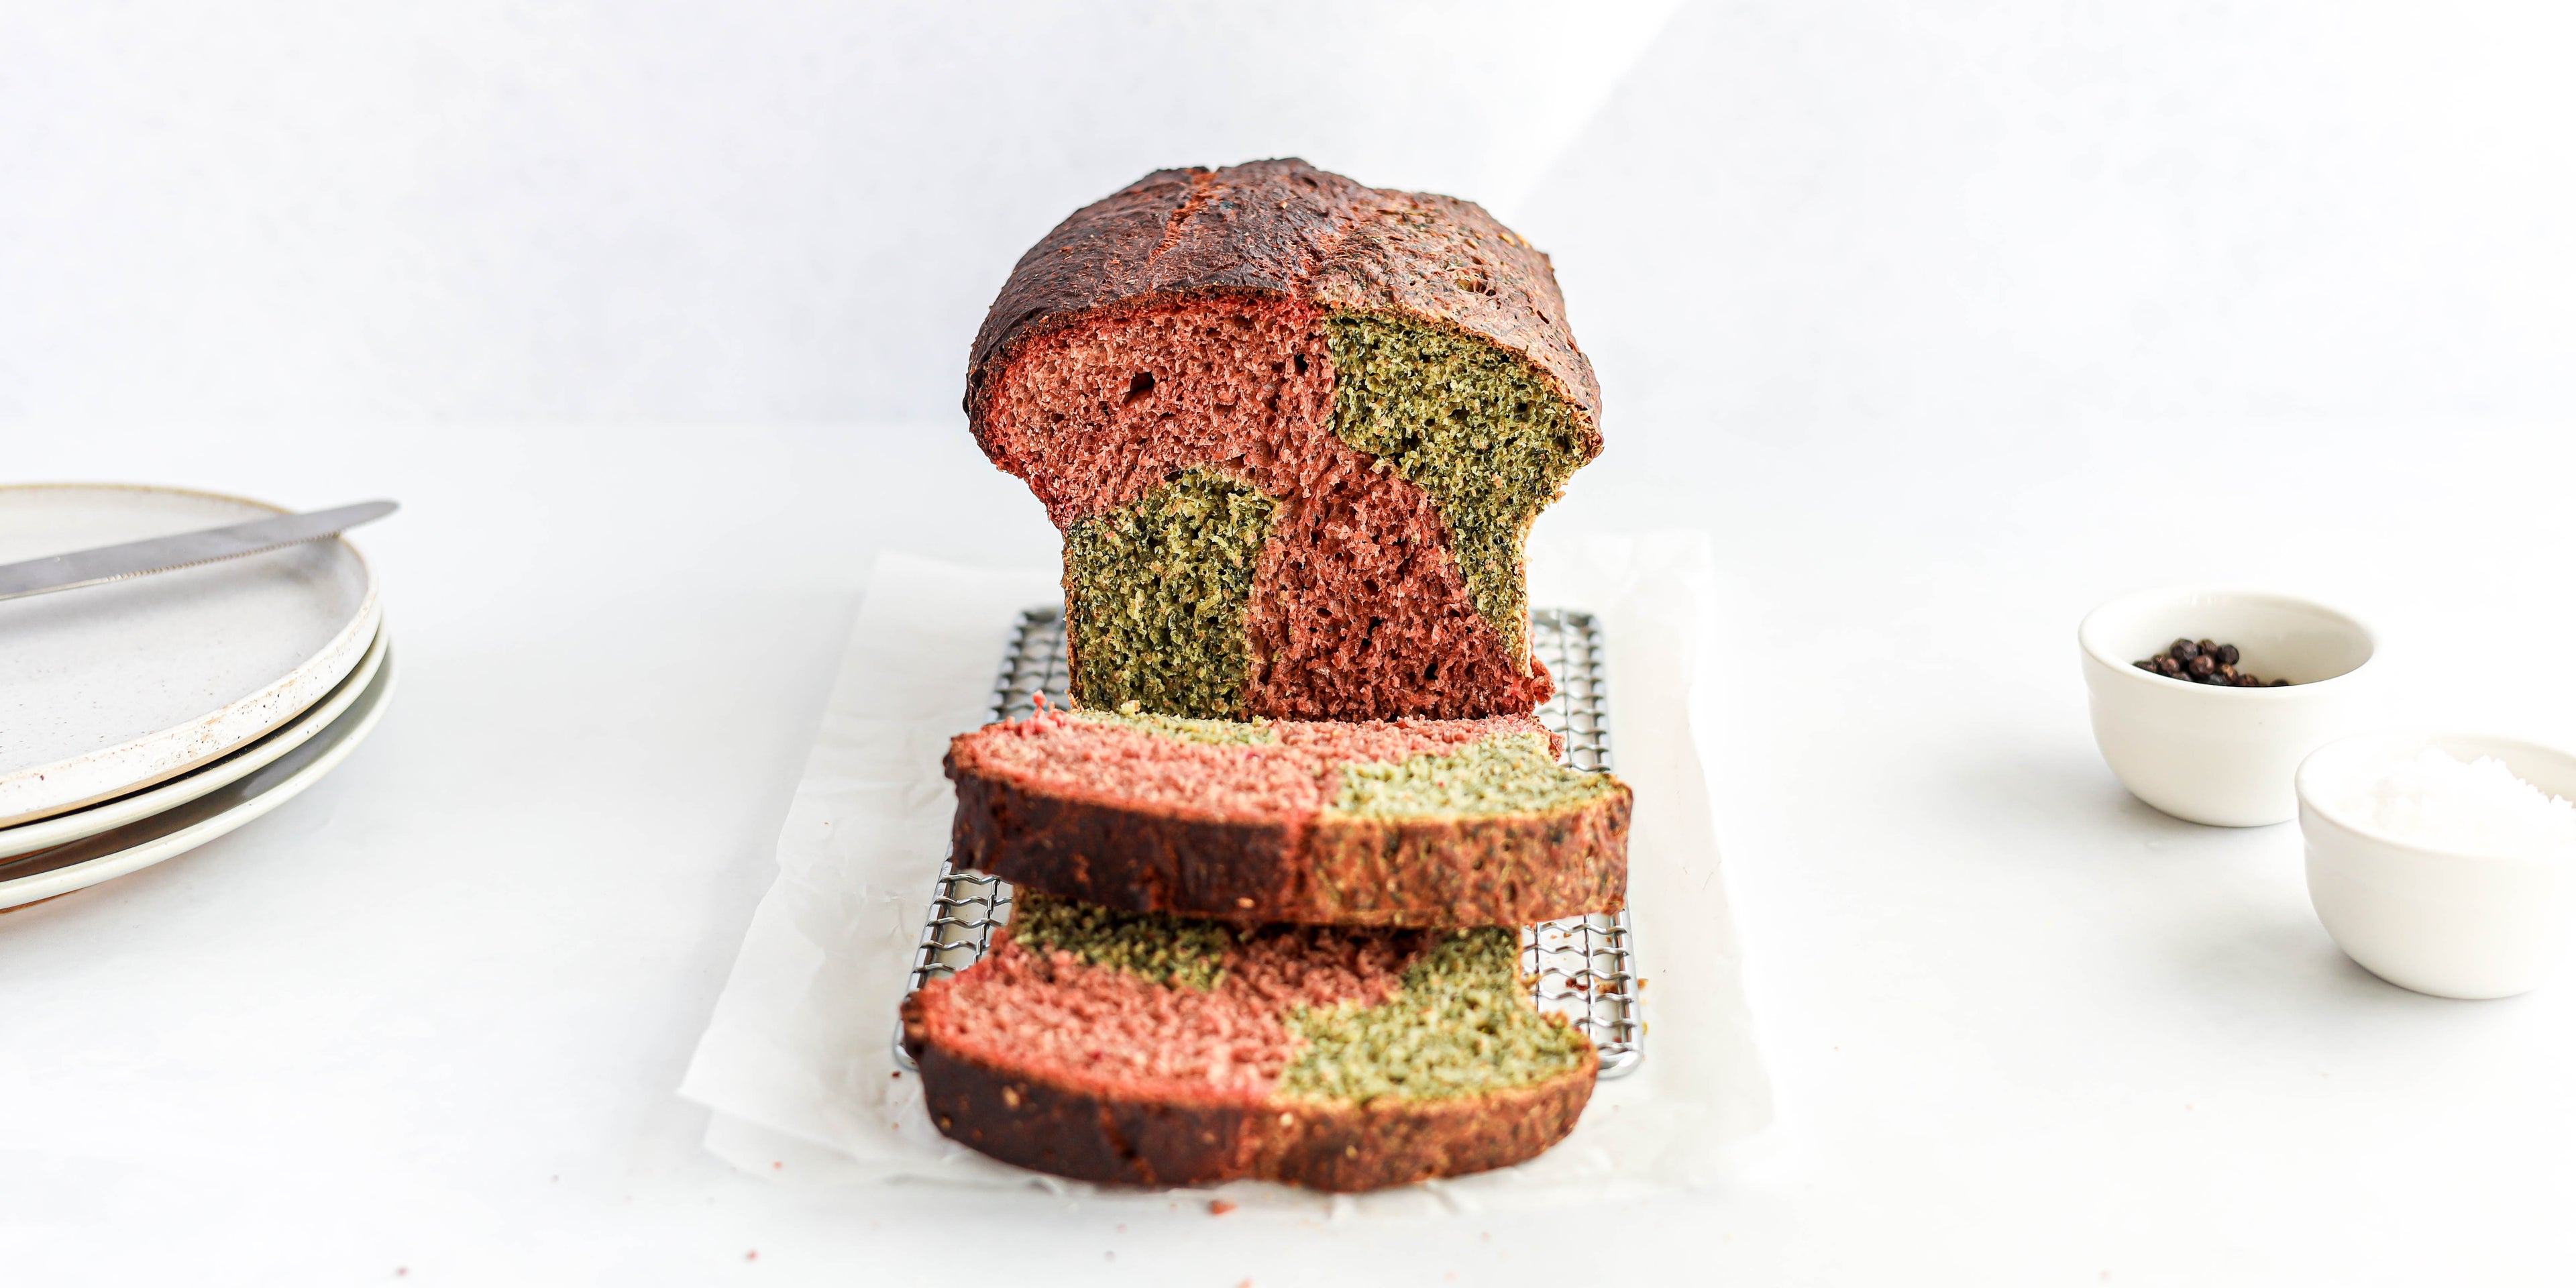 Marble Vegetable Bread close up, with two slices cut off the end, showing the pink and green insides of the vegetable loaf